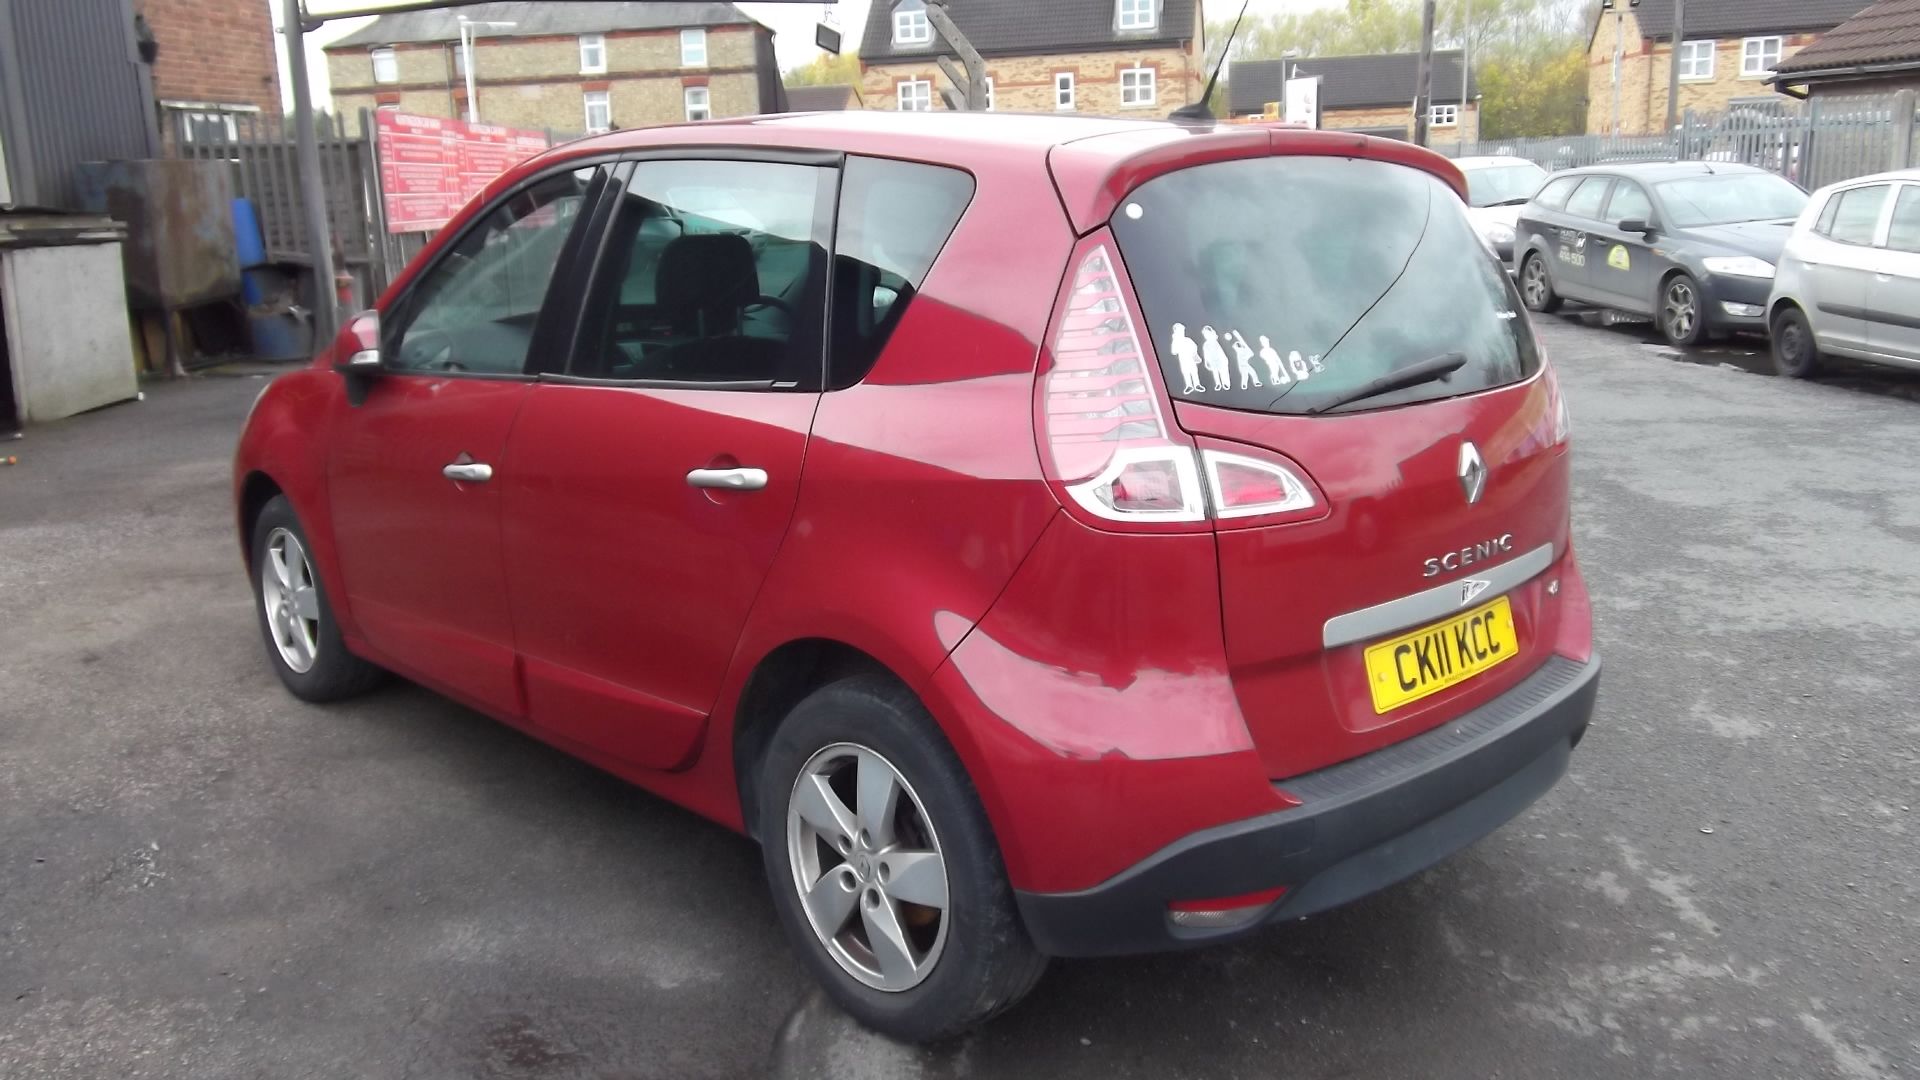 2011 Renault Scenic 1.5 DCI Dynamique Tom Tom 5 Door MPV - Image 15 of 17